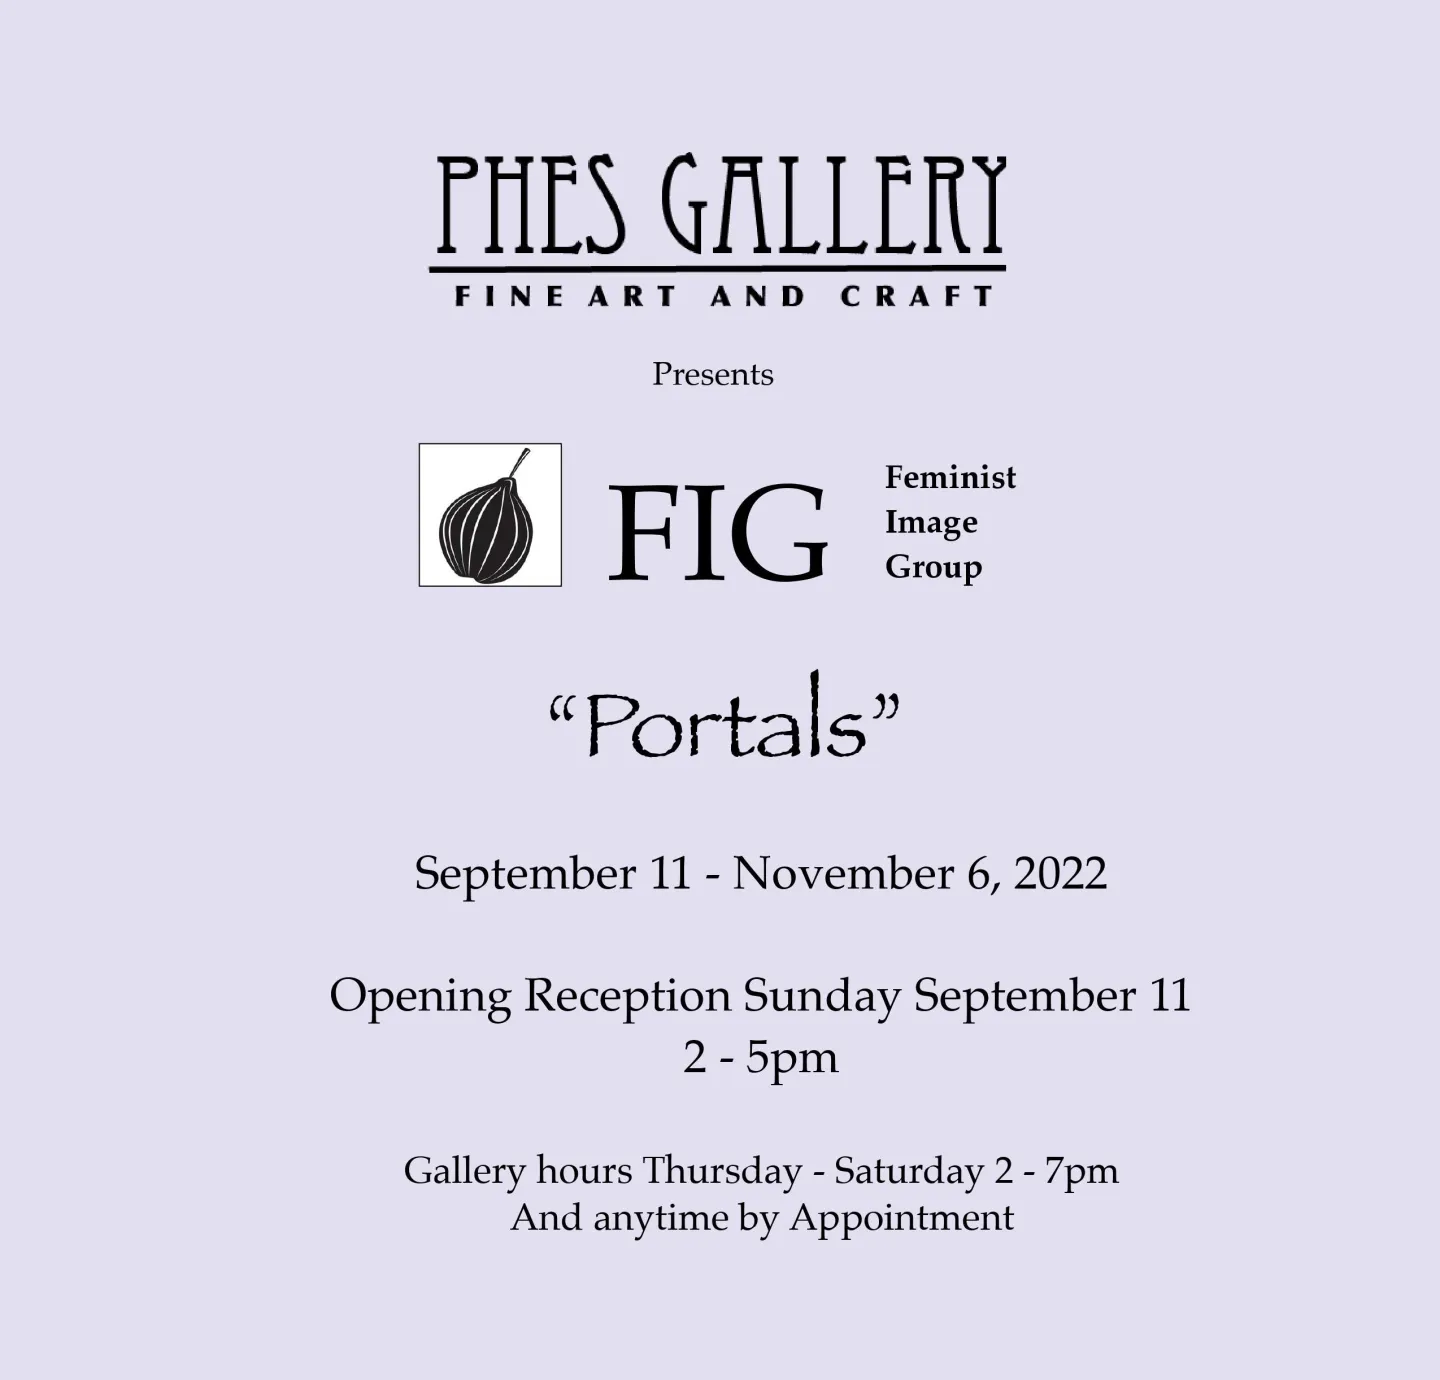 Phes Gallery